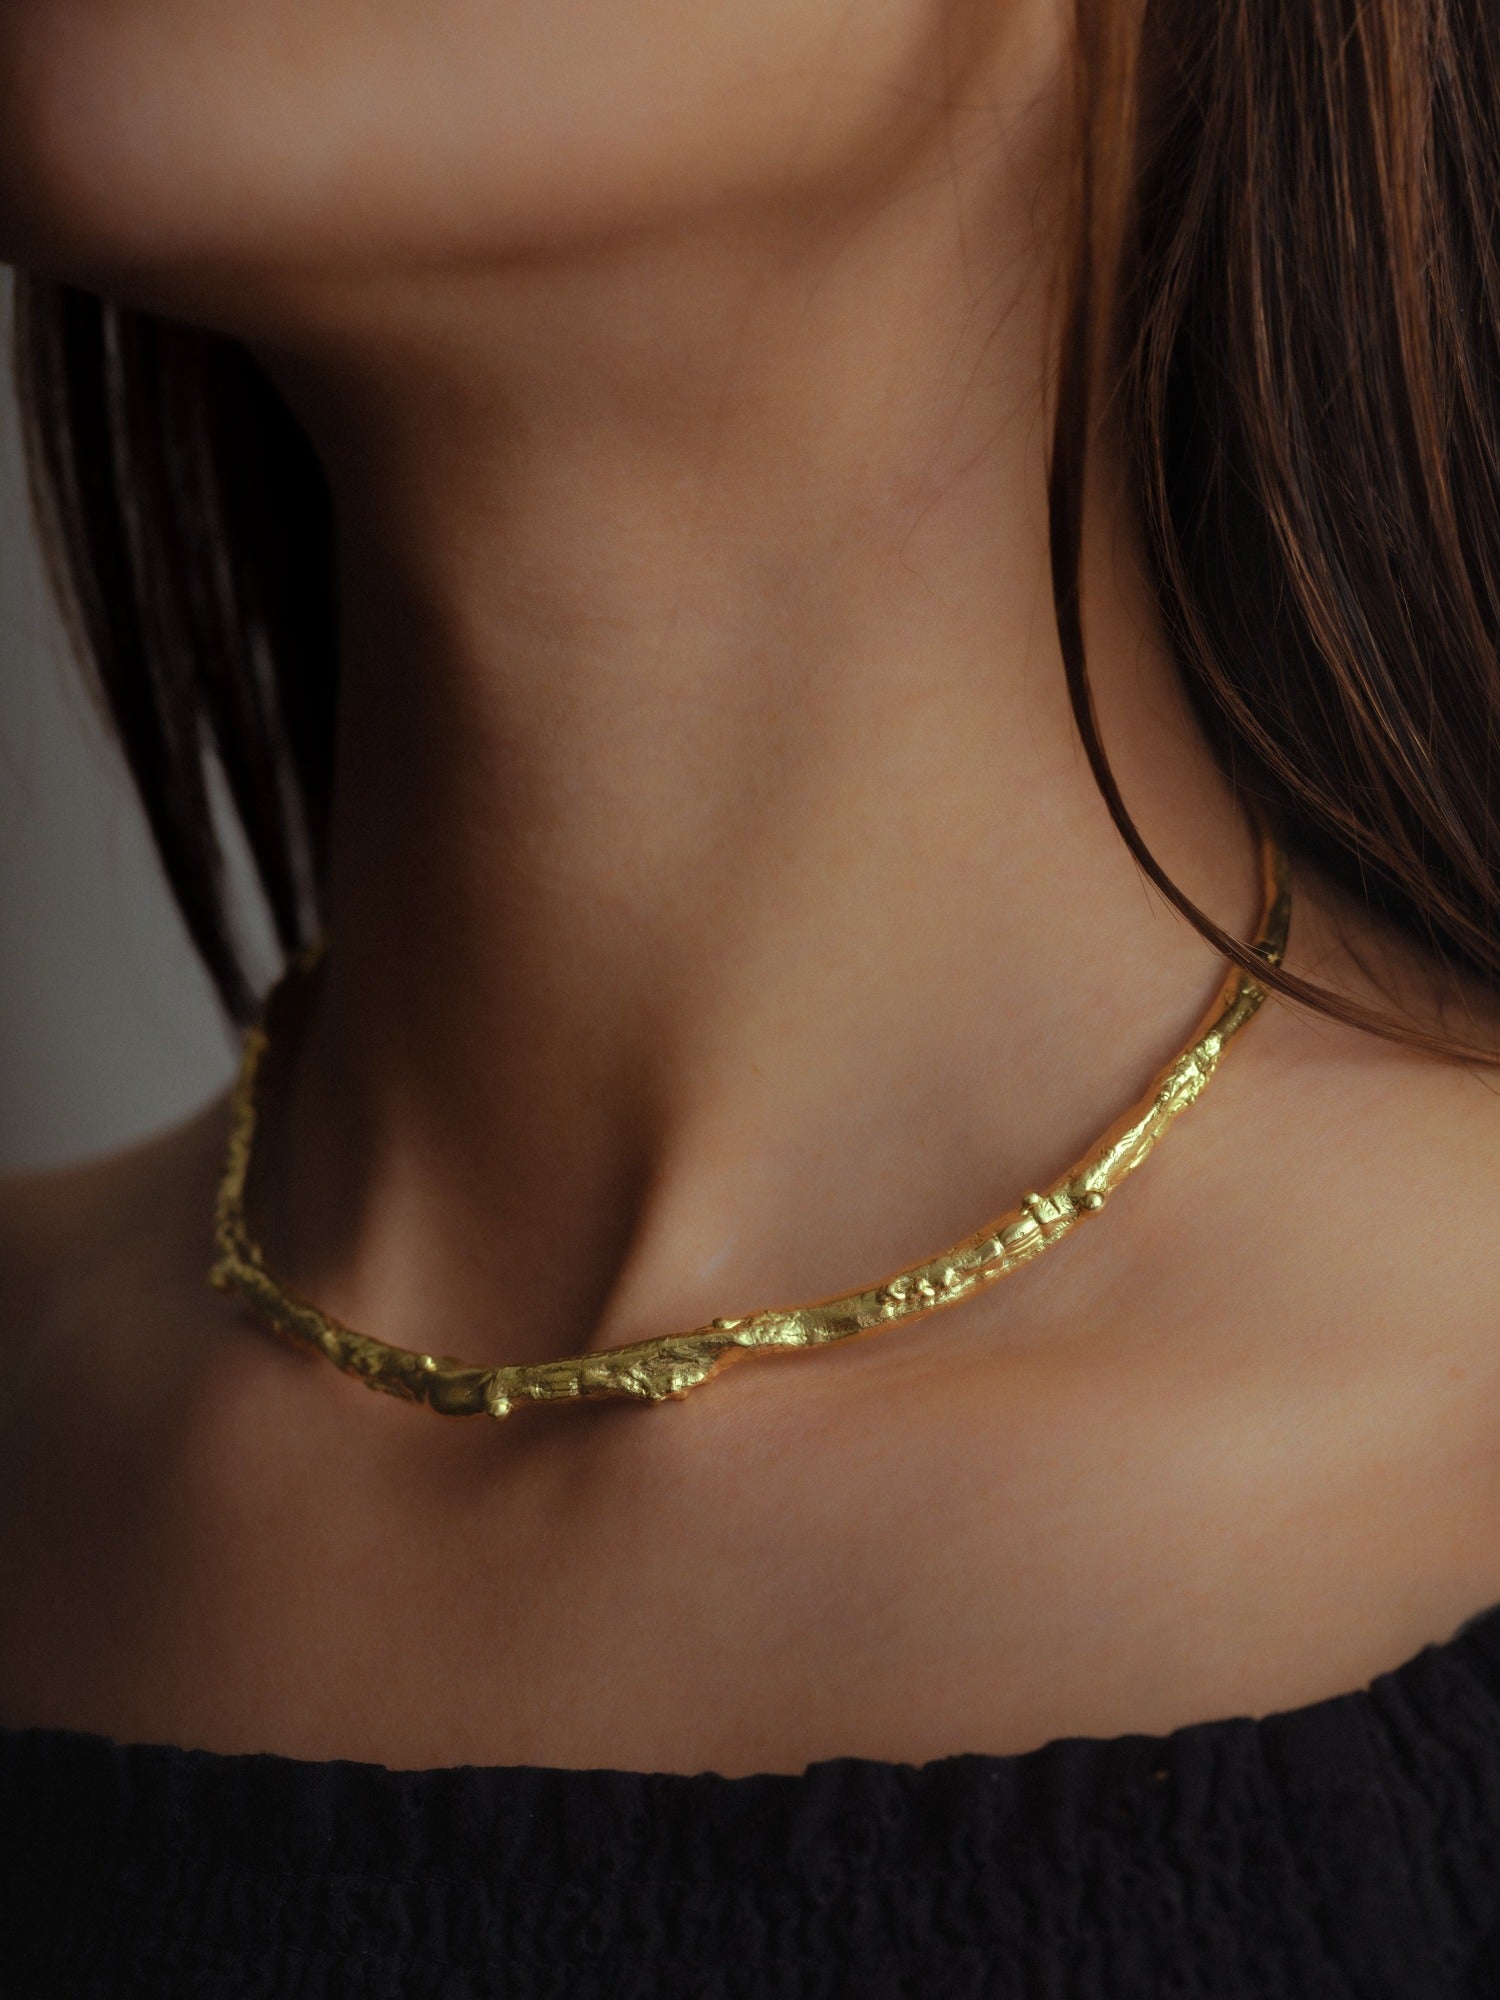 The Labyrinth Necklet